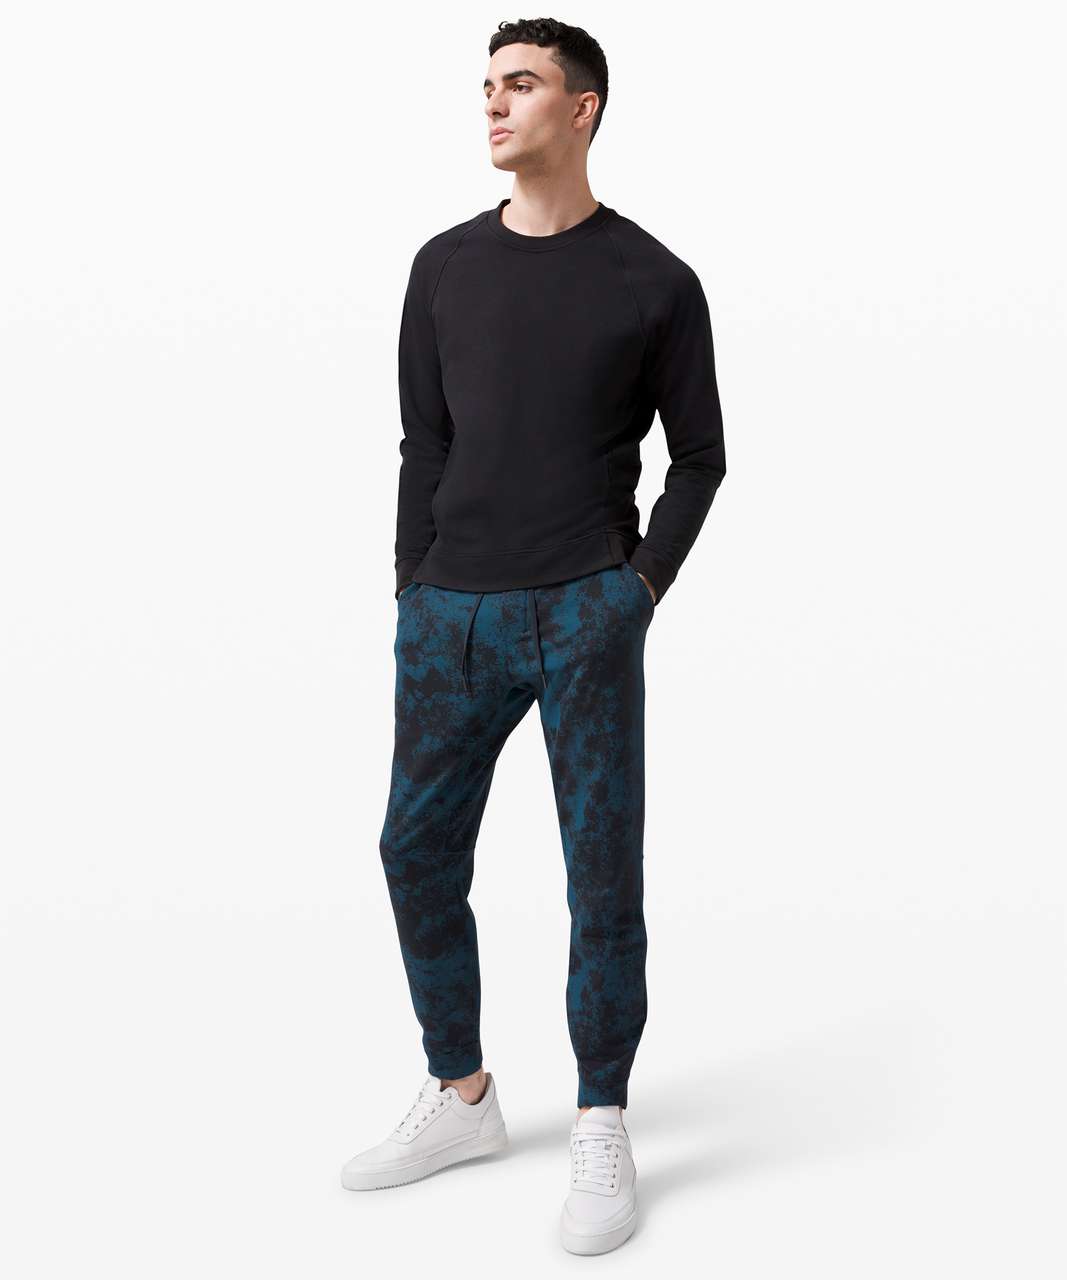 Lululemon City Sweat Jogger 29" *French Terry - Astral Classic Navy Blue Borealis